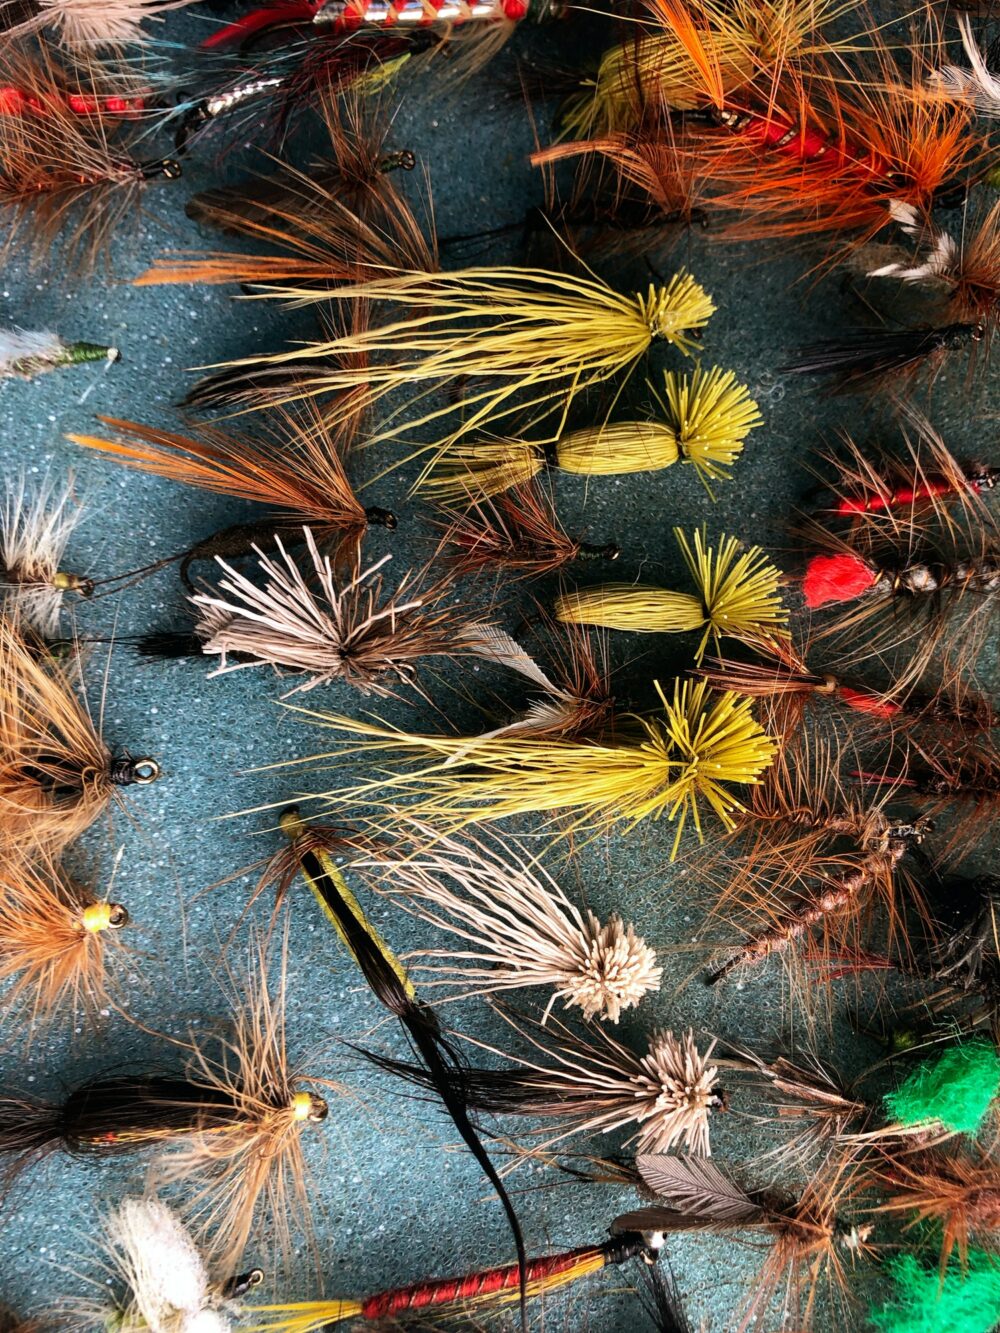 Tying is cheaper than buying; some say